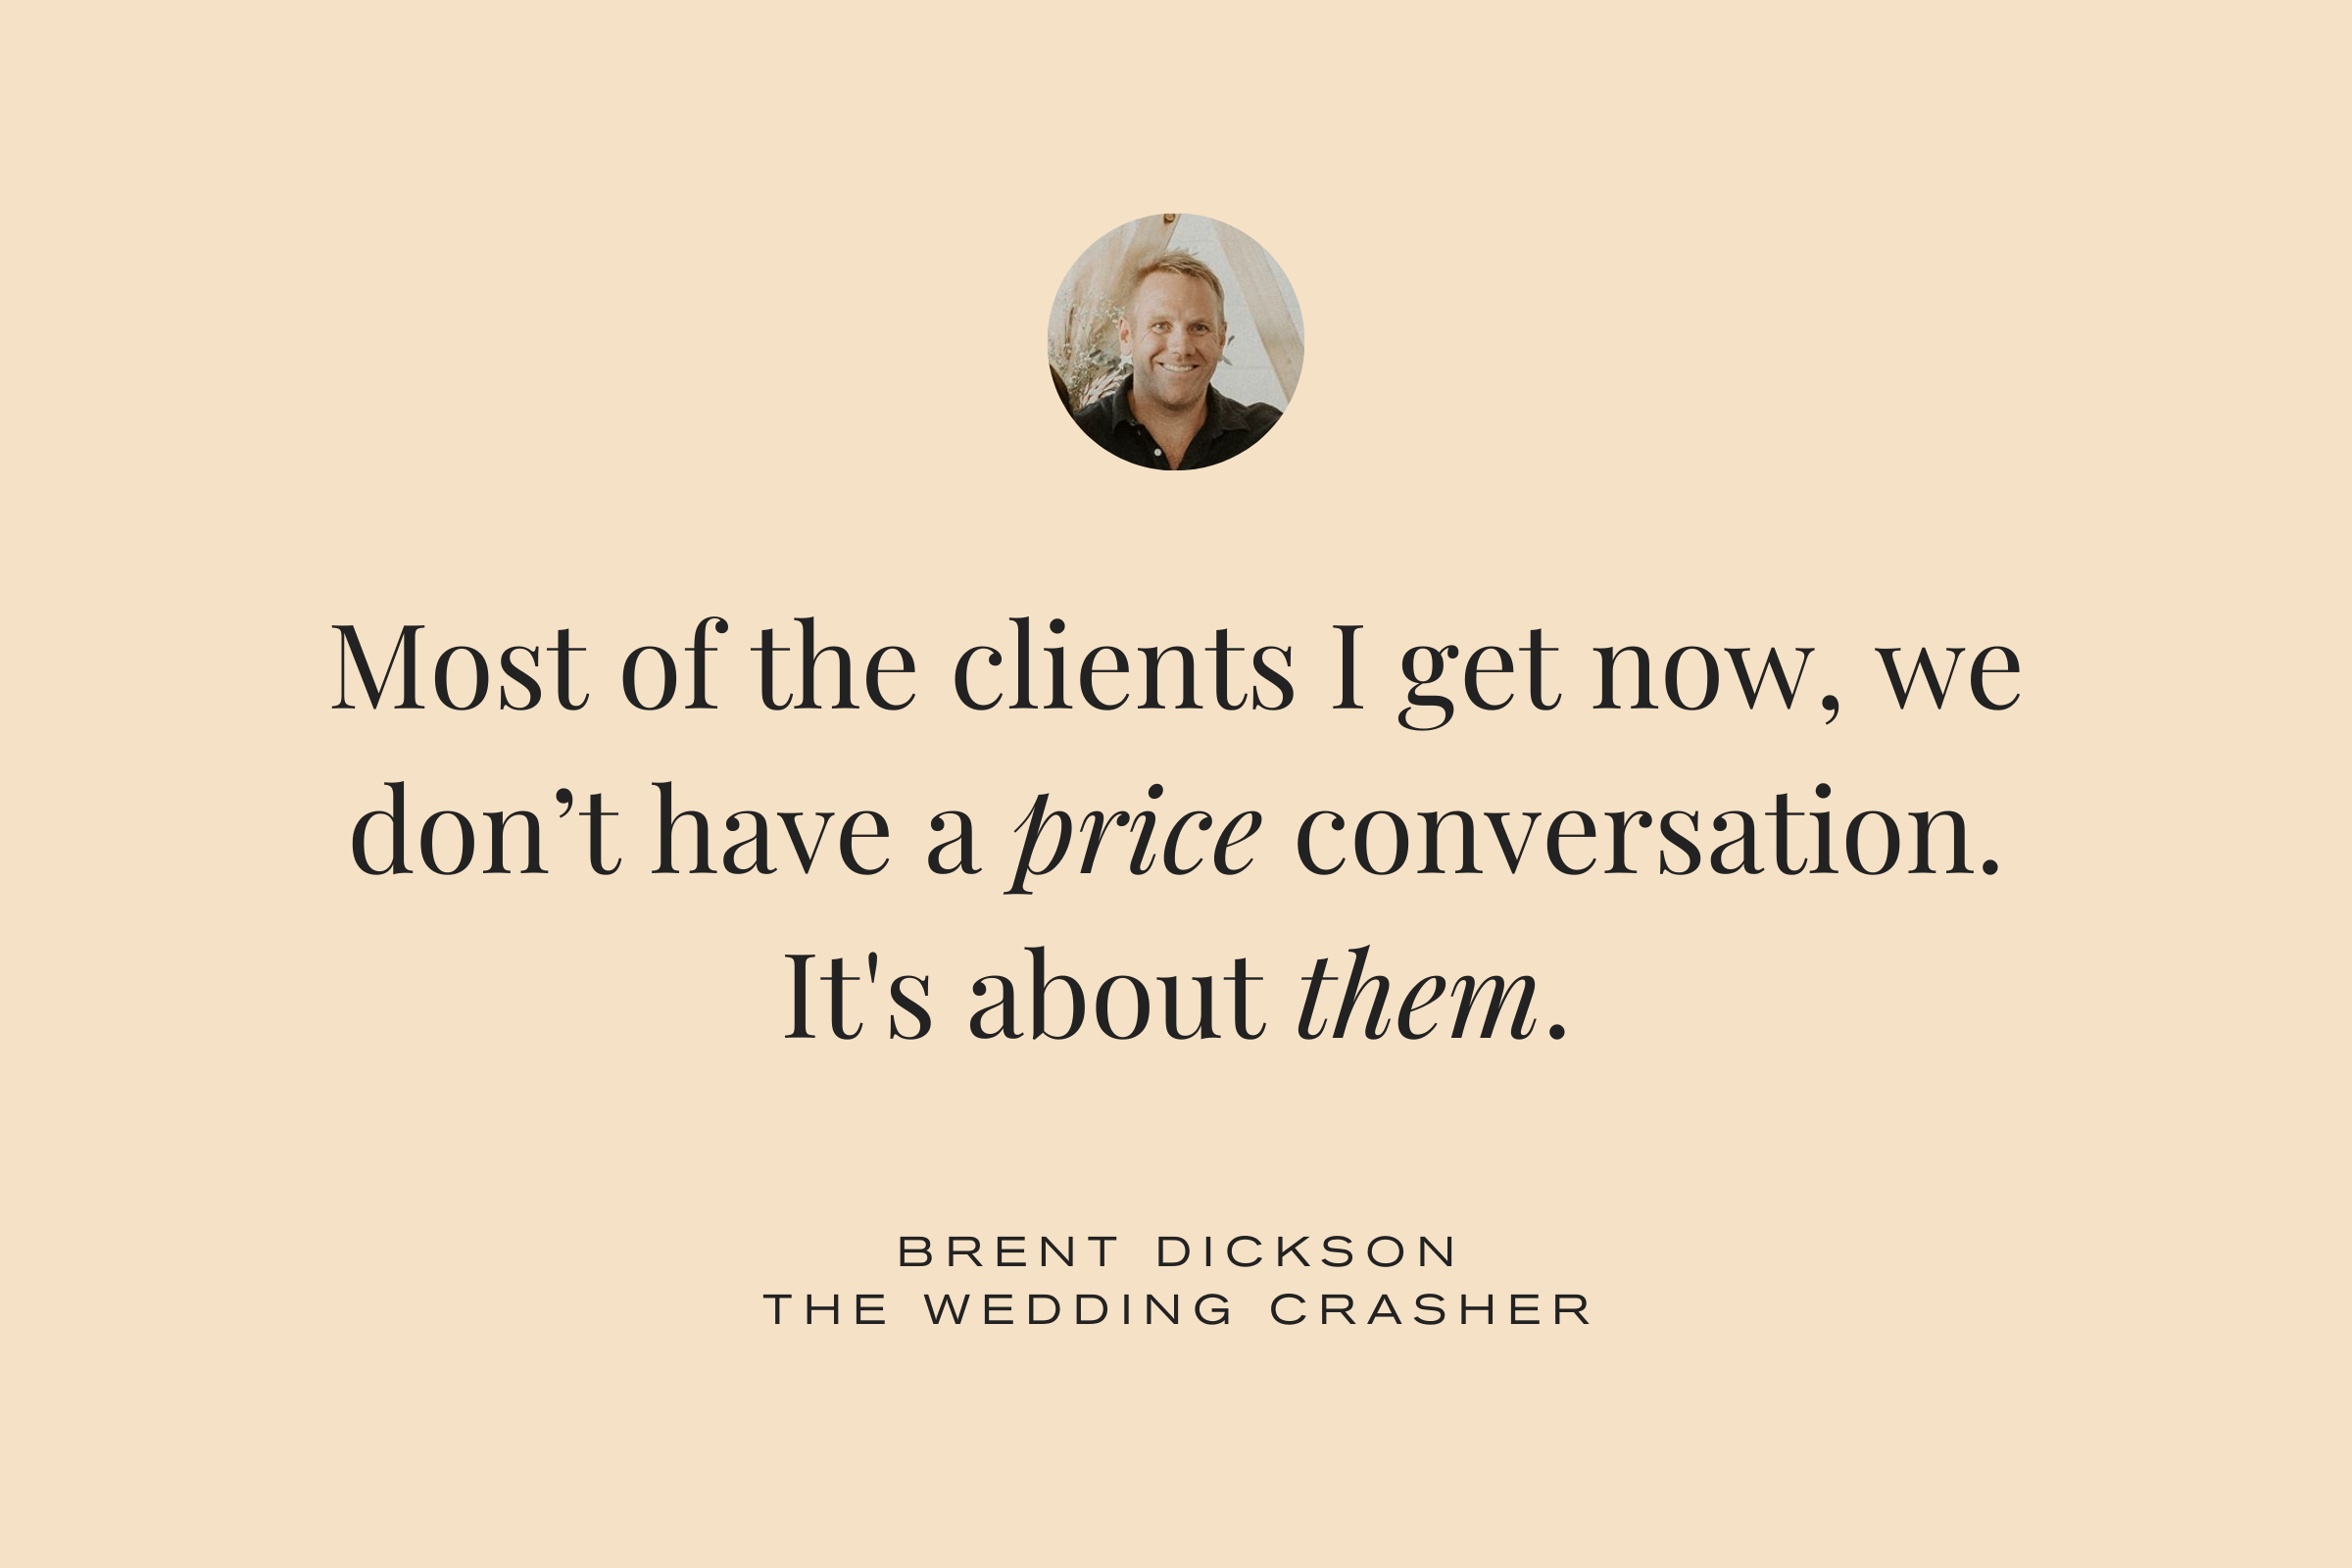 Brent Dickson The Wedding Crasher quote: "Most of the clients I get now, we don't have a price conversation."